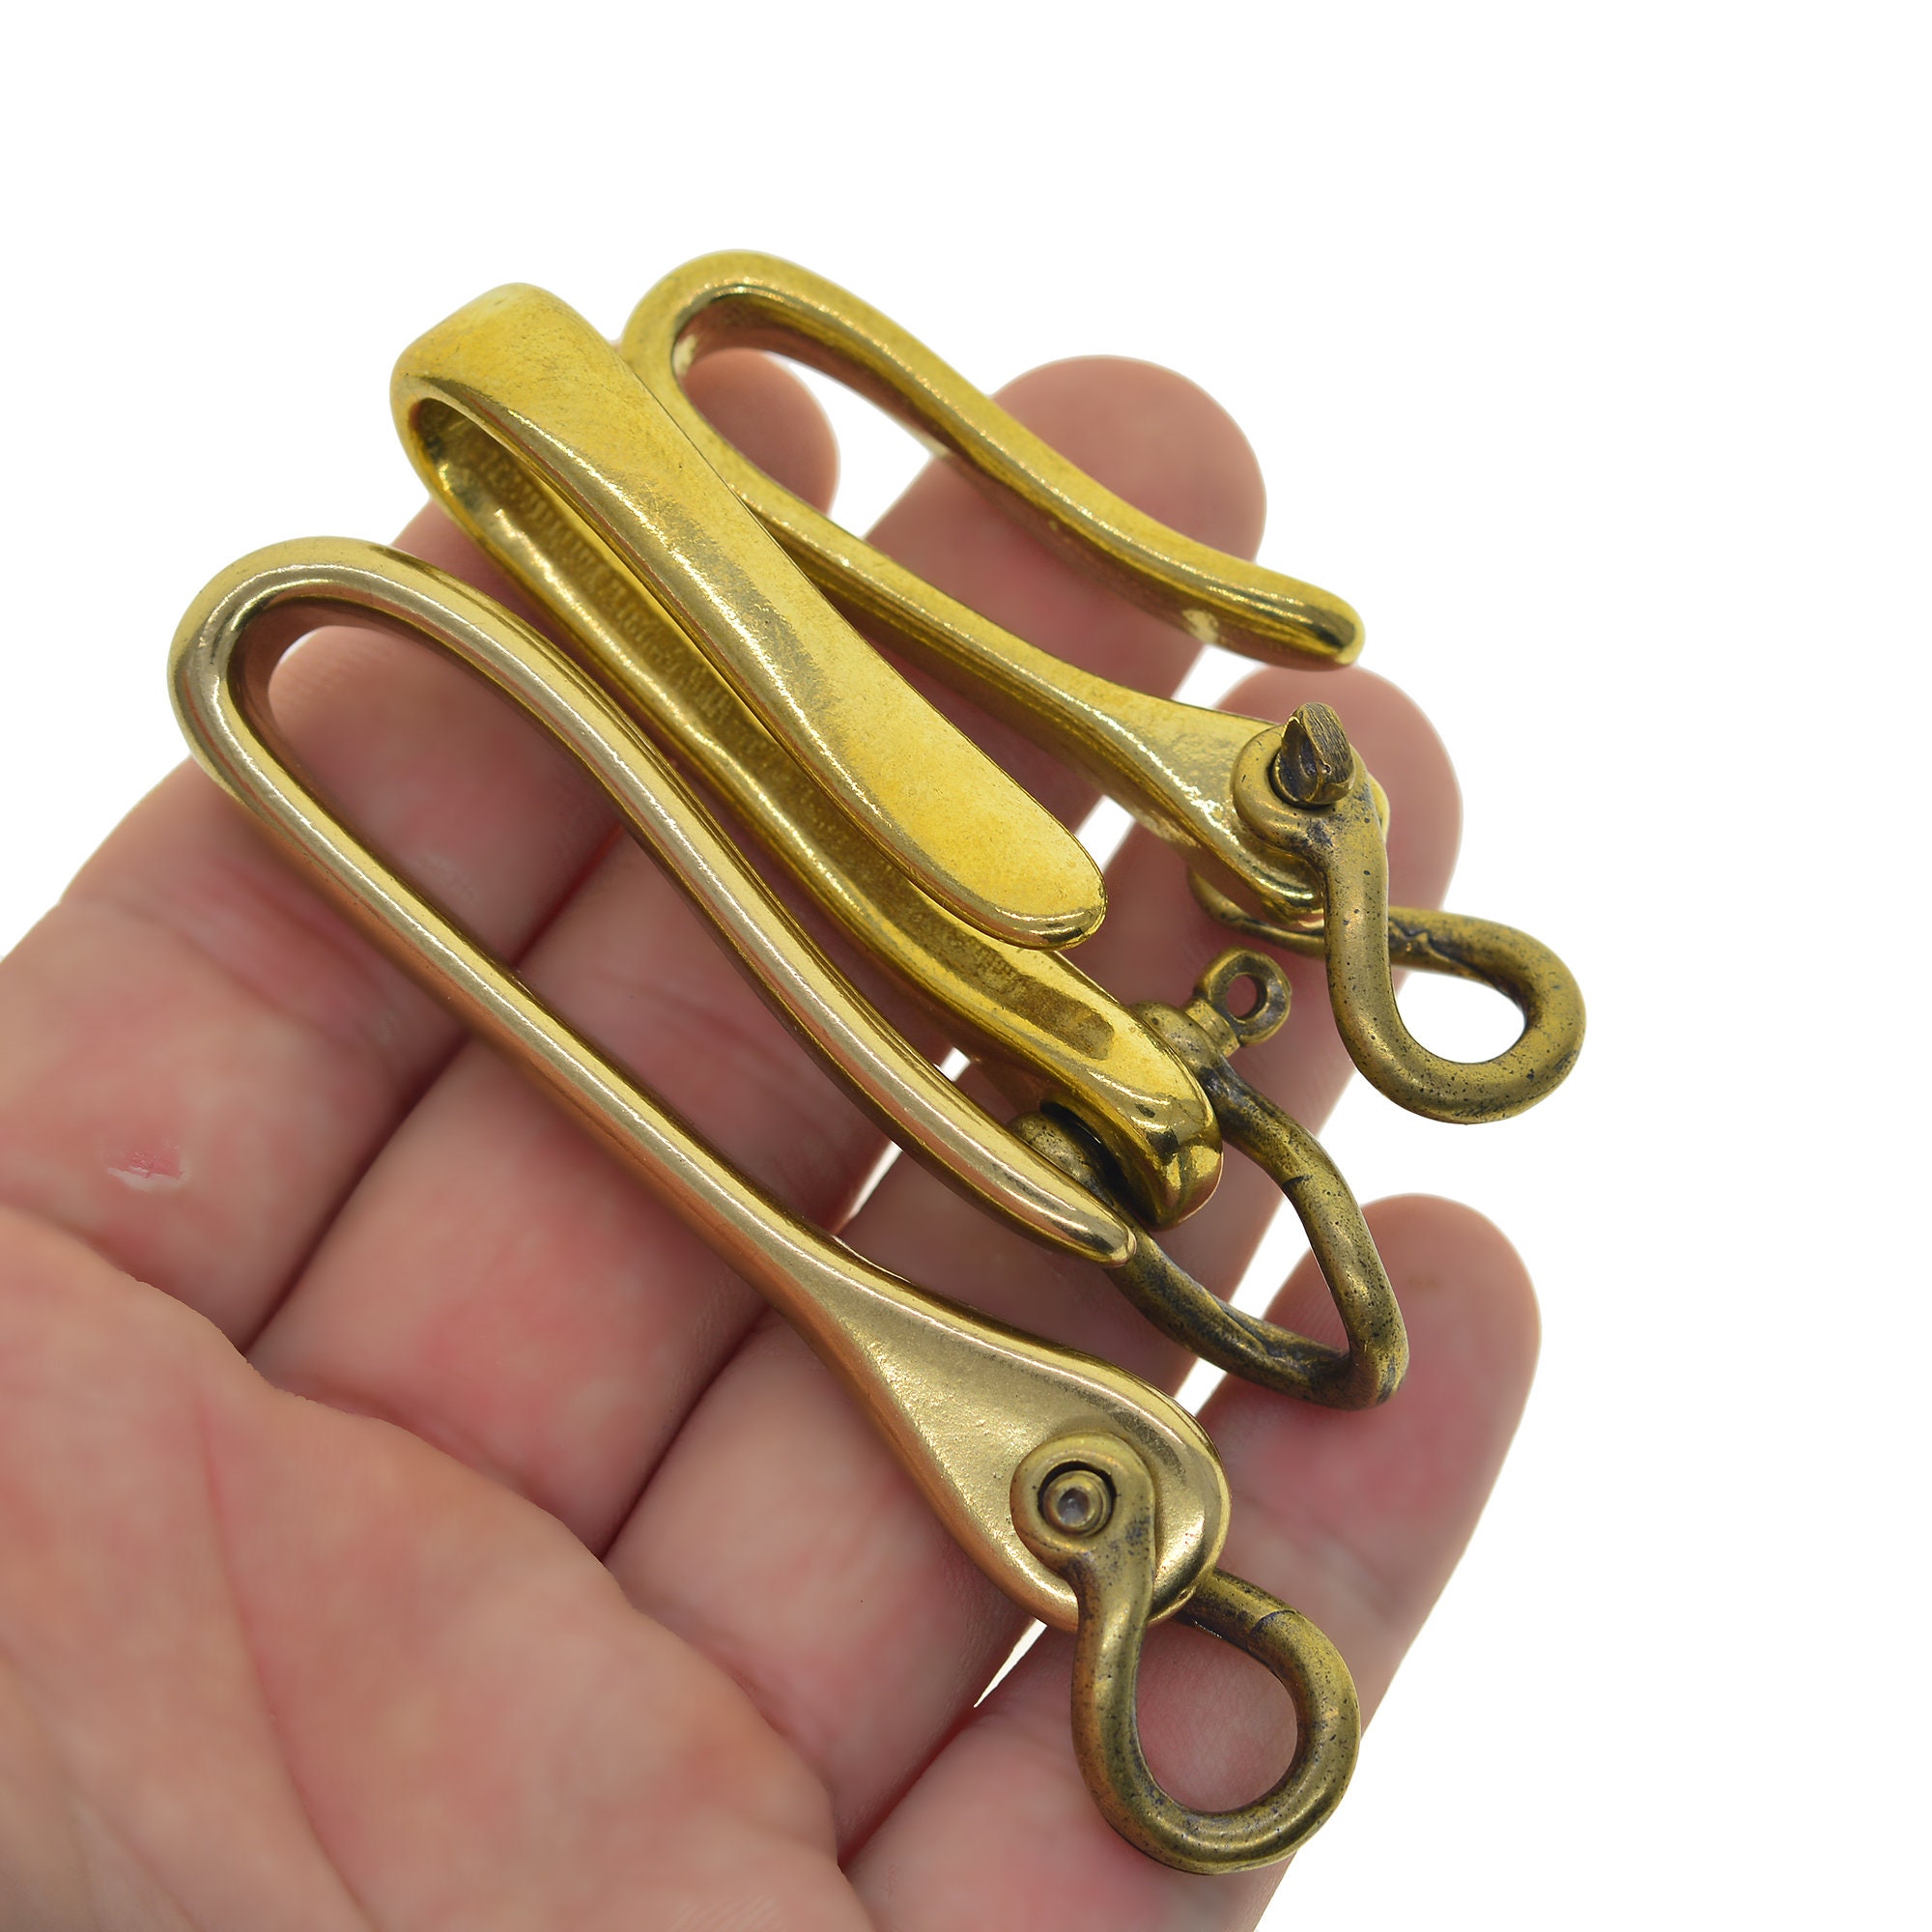 Alloy Spring Clasp, Double S Hook Spring Clasp. Easy Open Spring